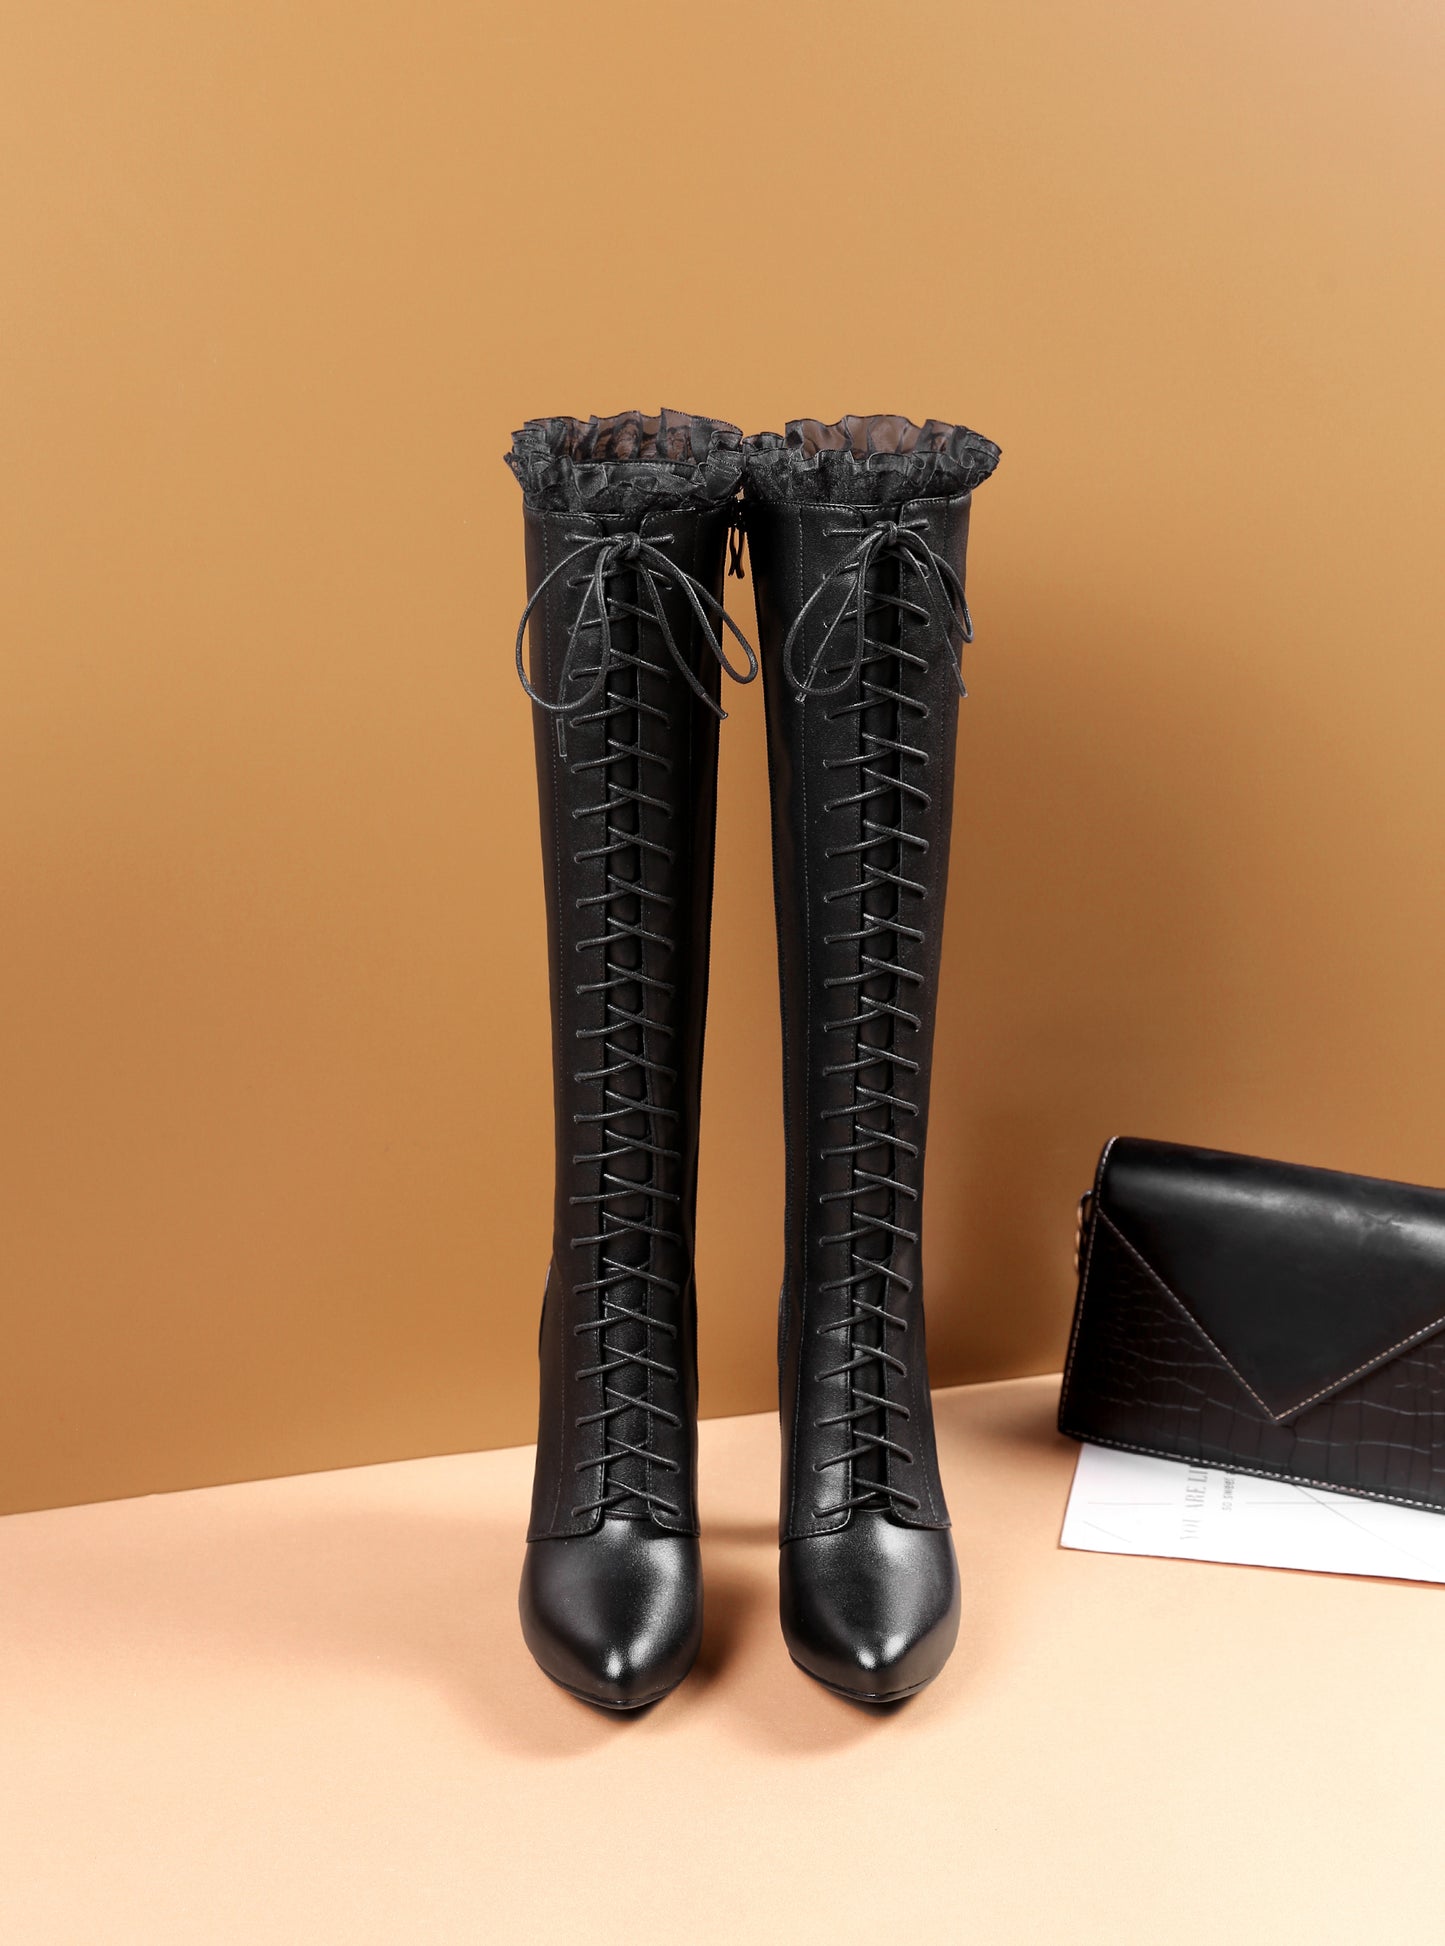 TinaCus Handmade Women's Genuine Leather  High Heel Zip Up Knee High Boots with Lace